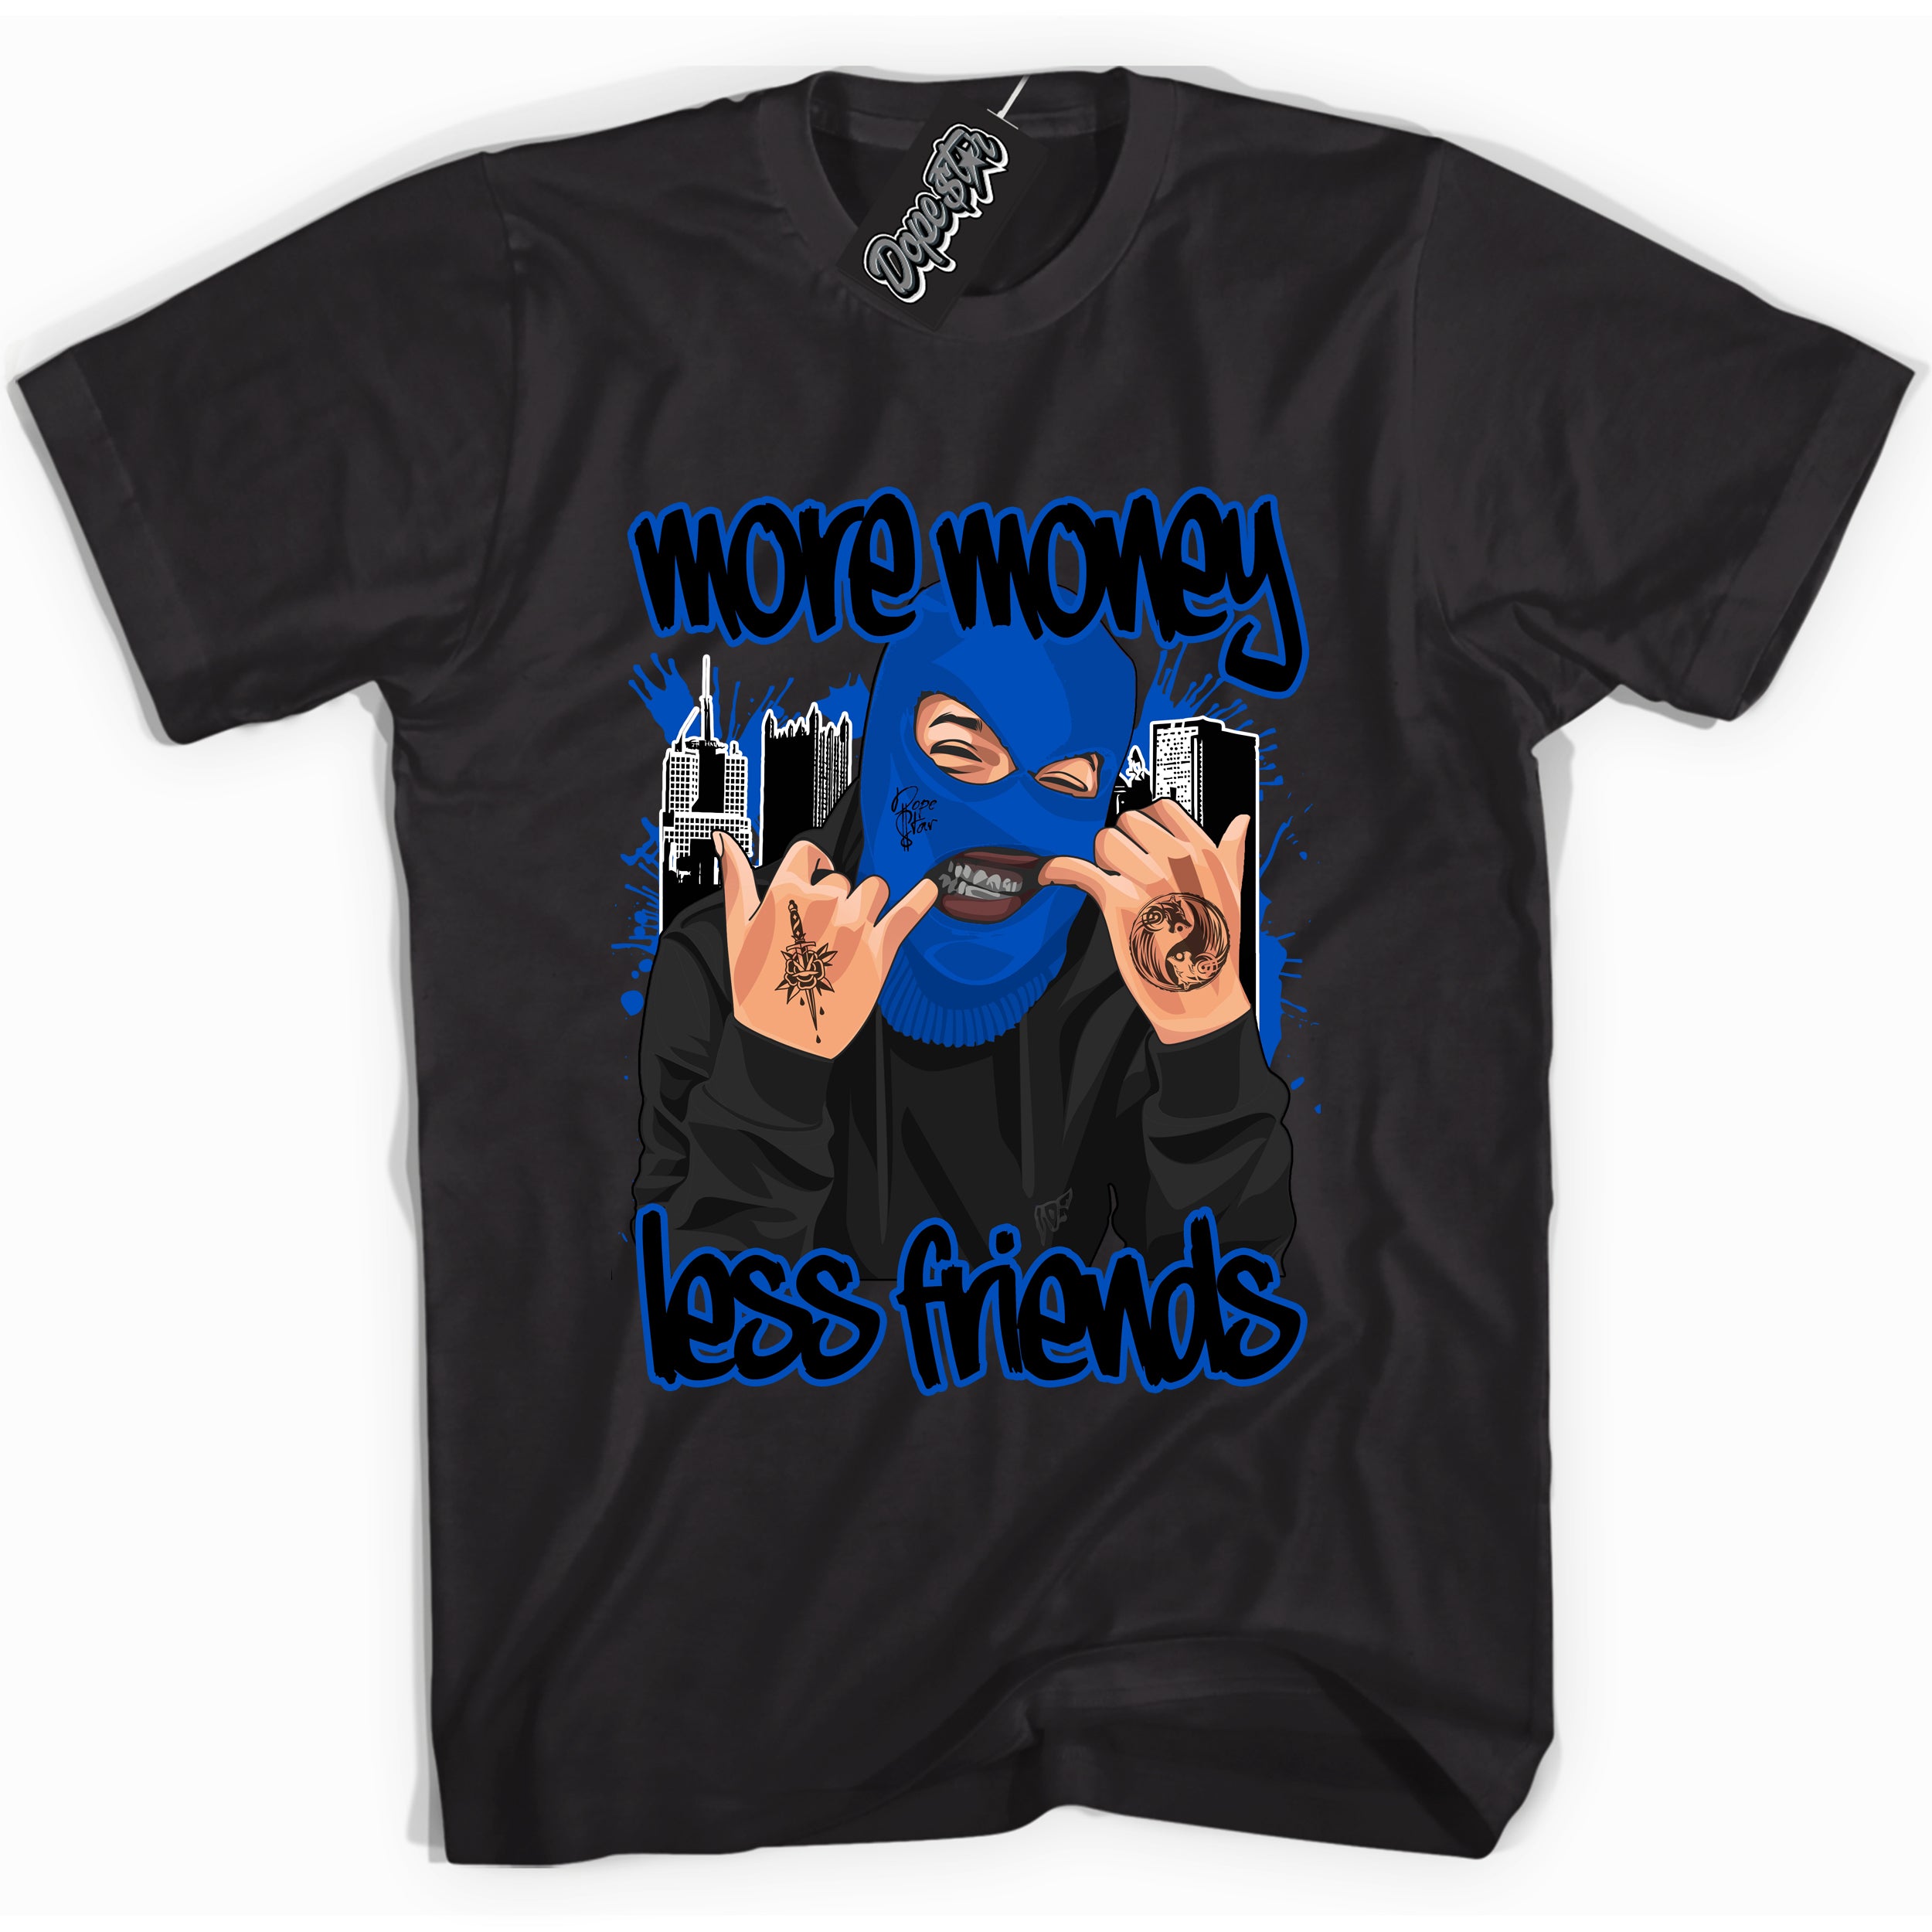 Cool Black graphic tee with "More Money Less Friends" design, that perfectly matches Royal Reimagined 1s sneakers 